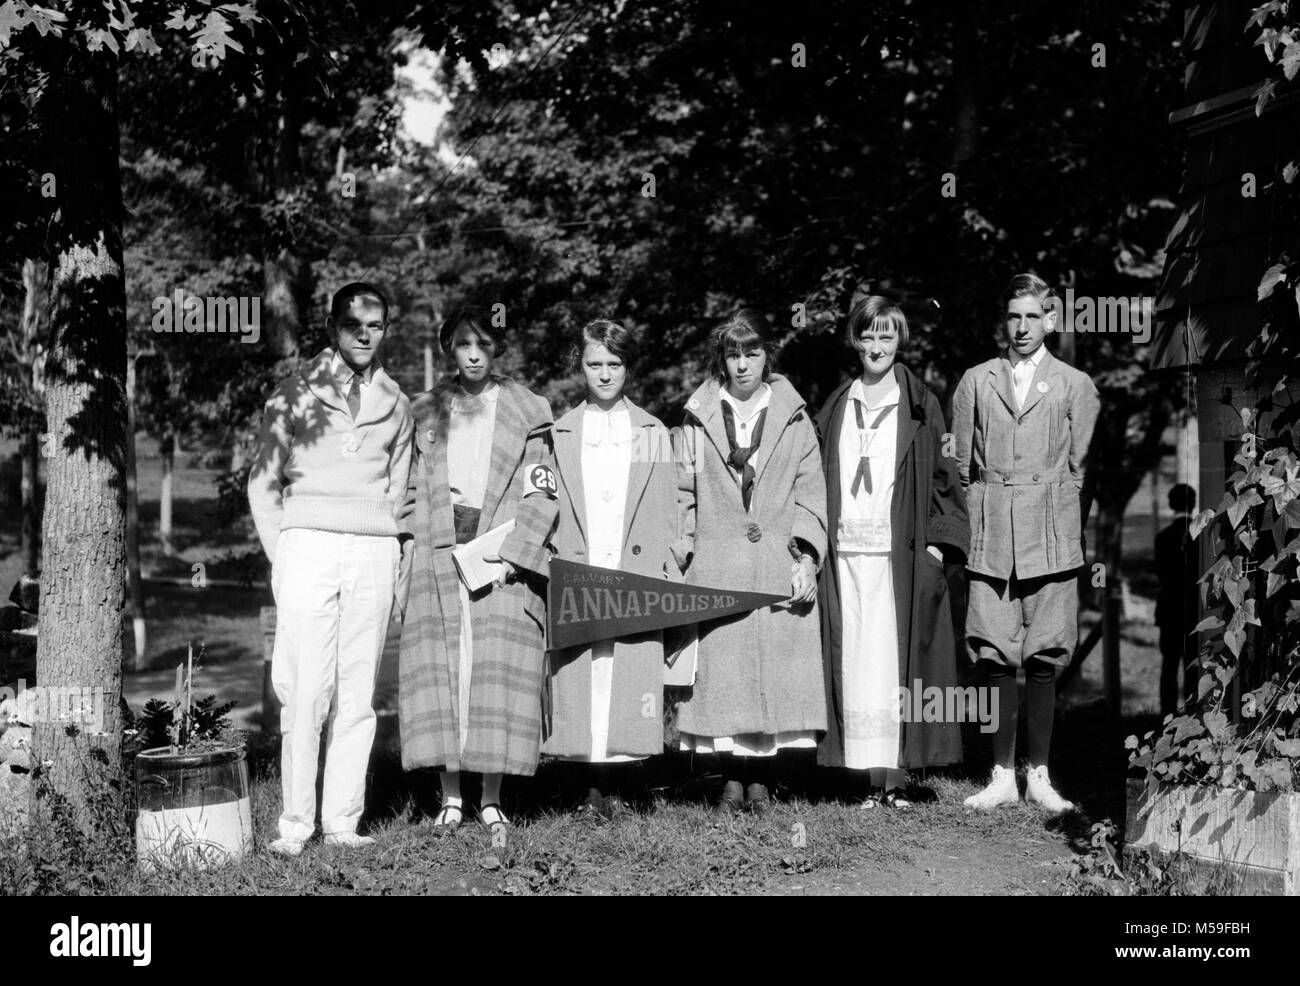 HIgh school students in Annapolis, MD show their school pride, c. 1929. Stock Photo